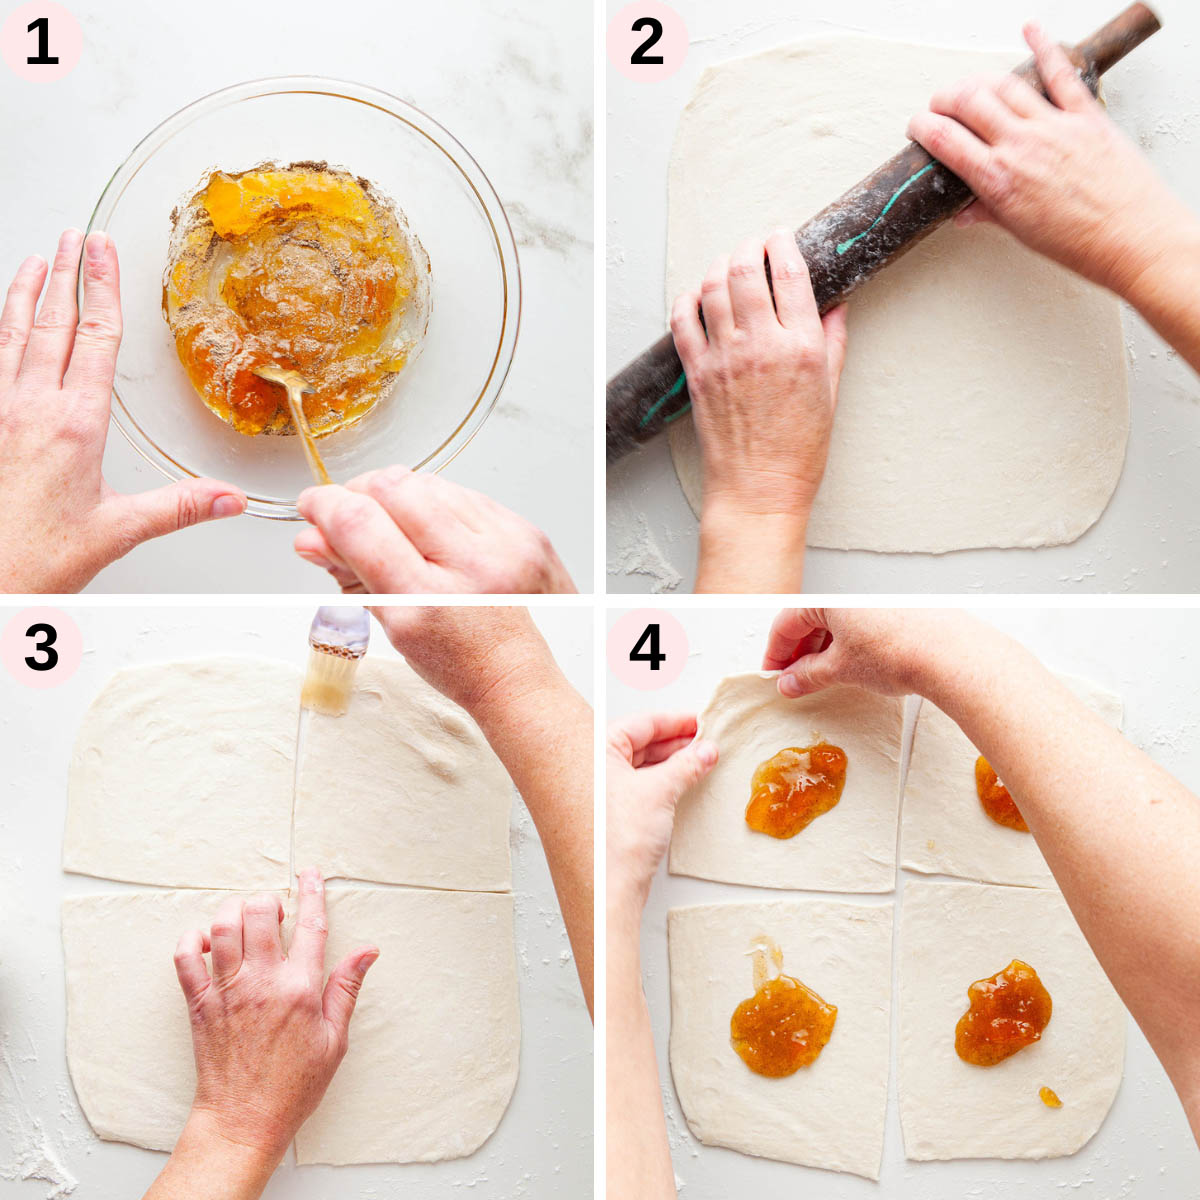 Peach turnover process shots 1 to 4.